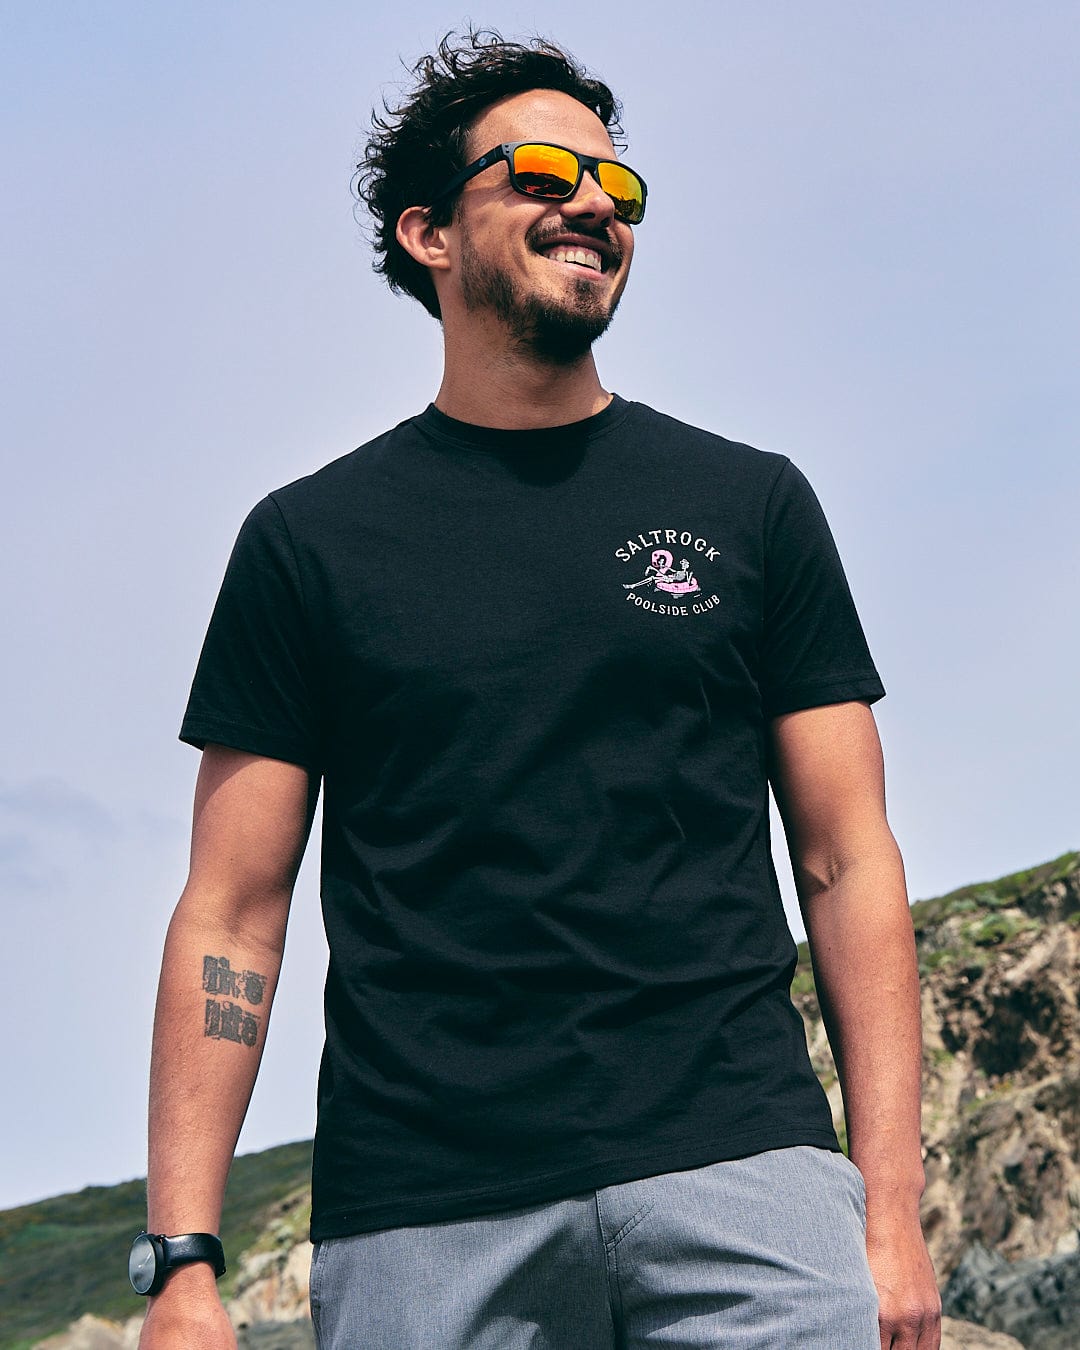 A man wearing sunglasses and a Poolside Club - Mens Short Sleeve T-Shirt - Black by Saltrock.